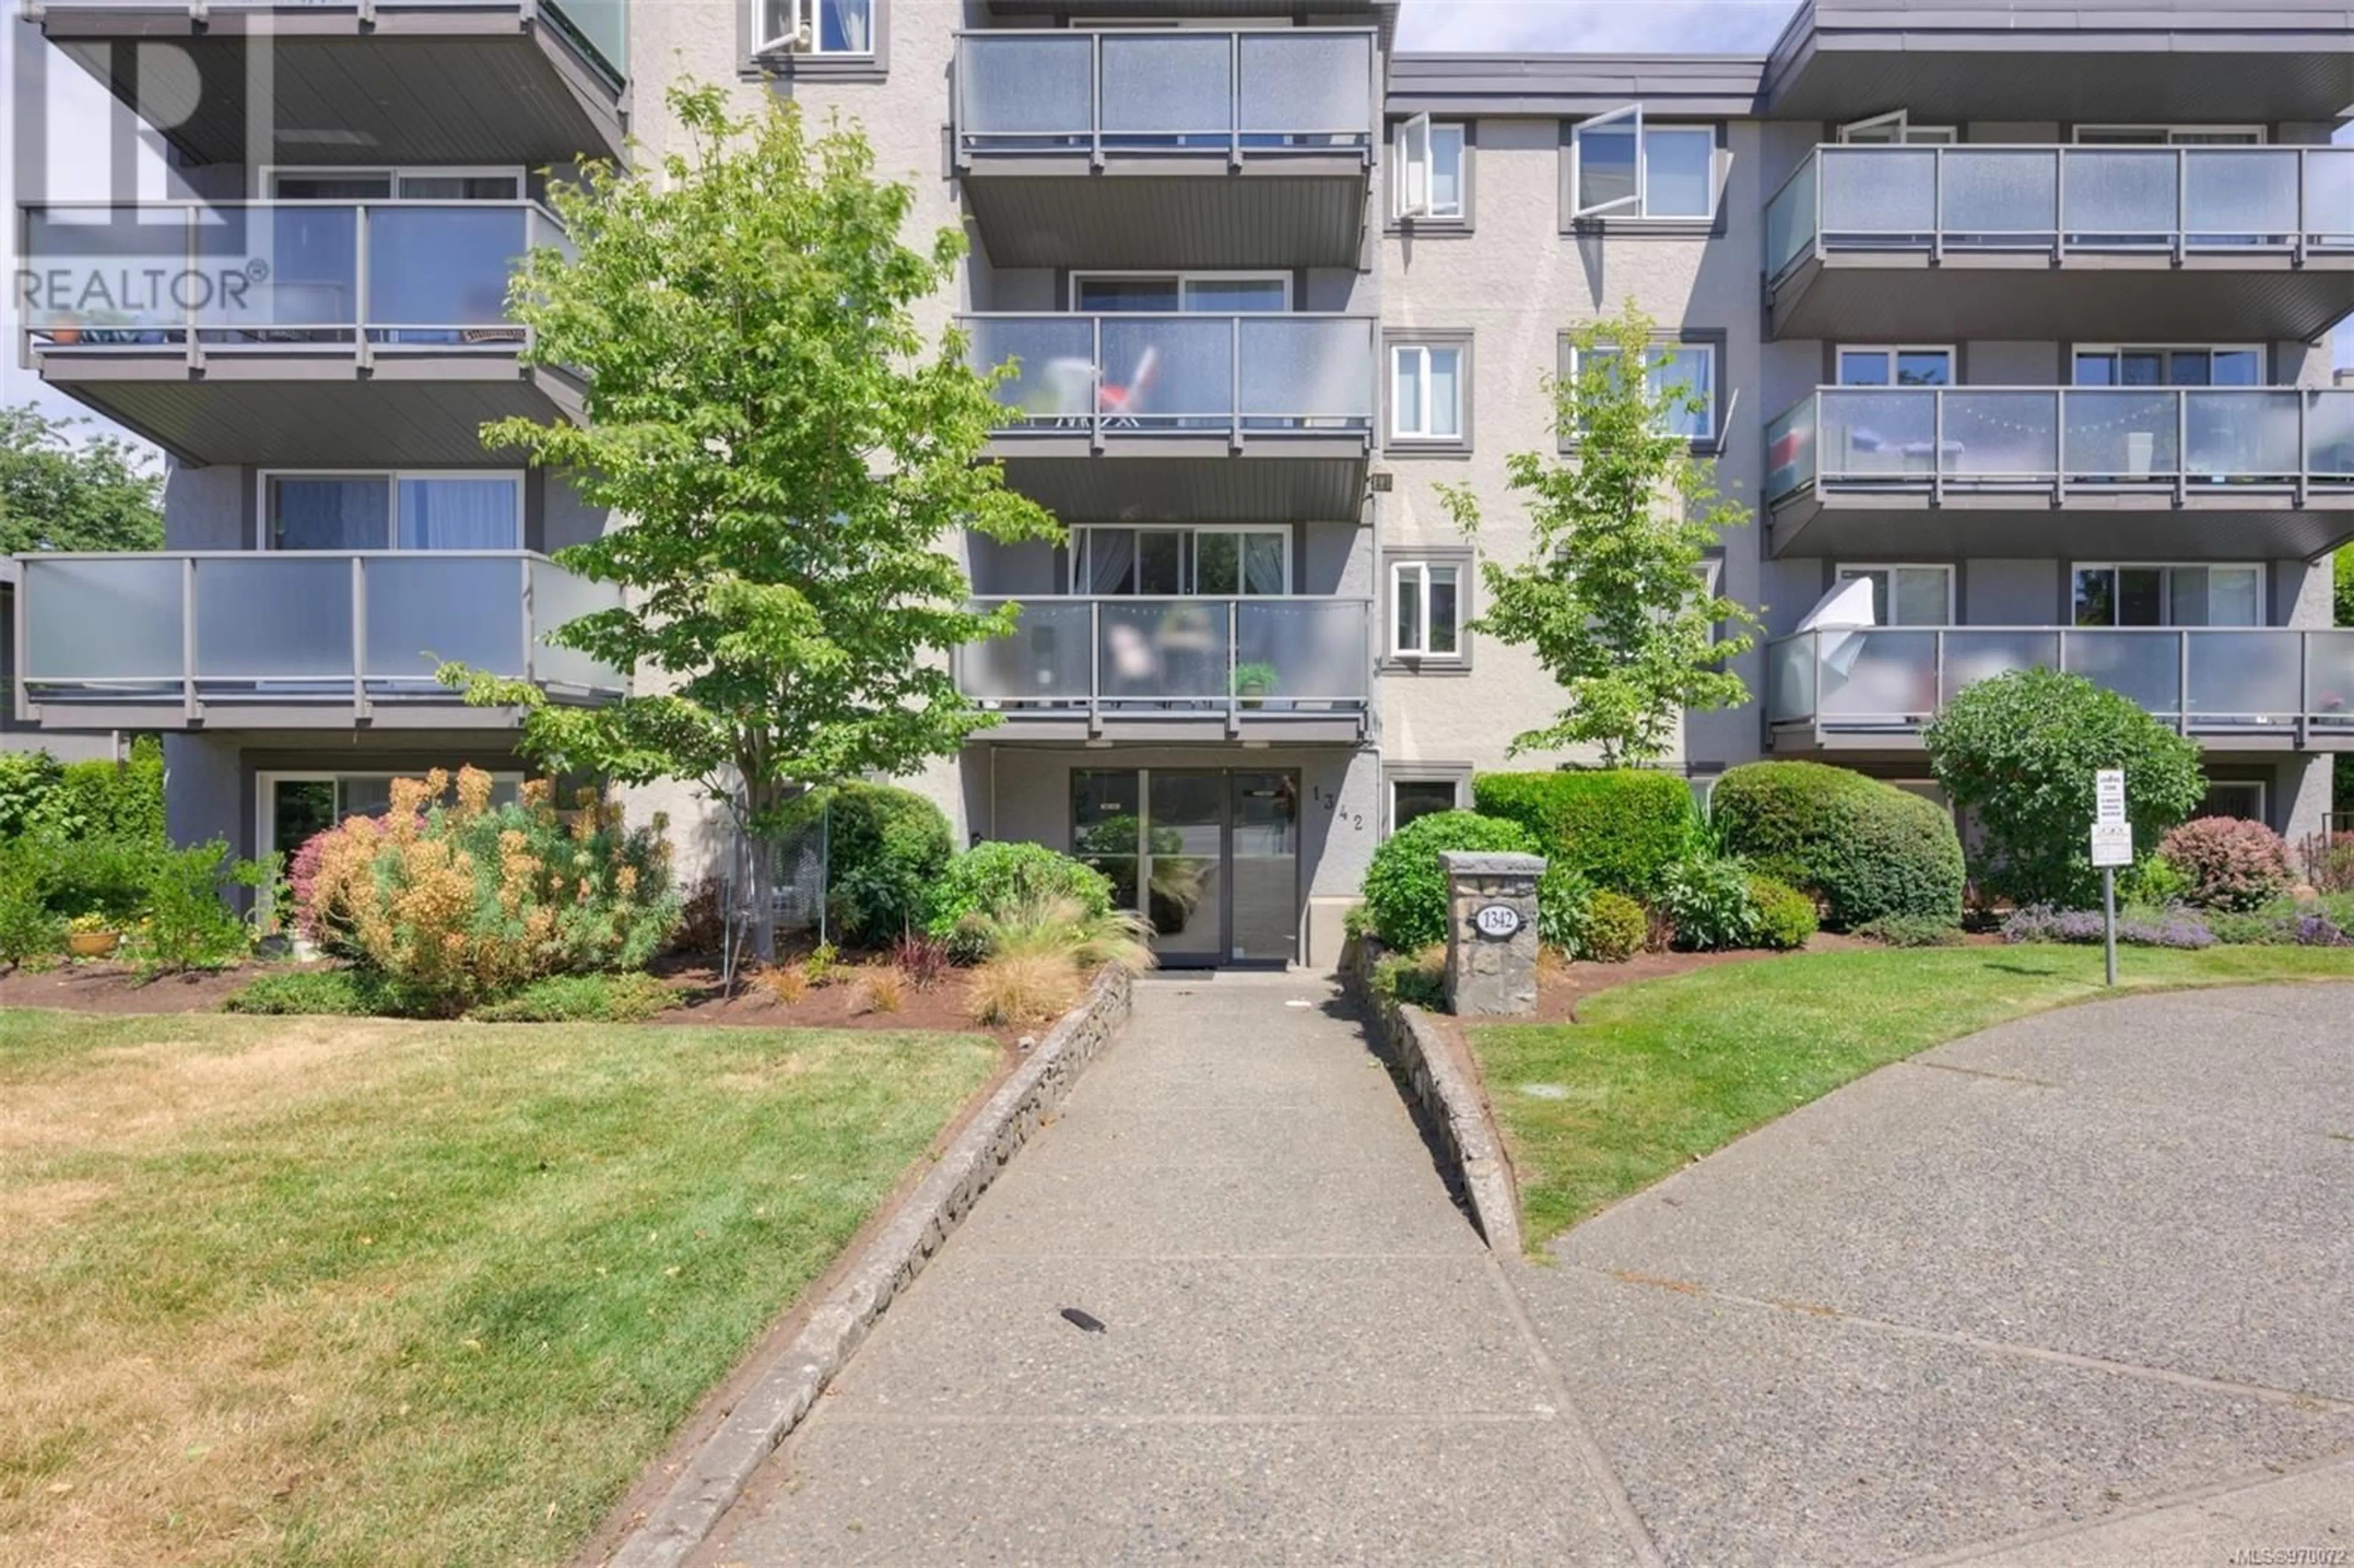 A pic from exterior of the house or condo for 204 1342 Hillside Ave, Victoria British Columbia V8T2B4